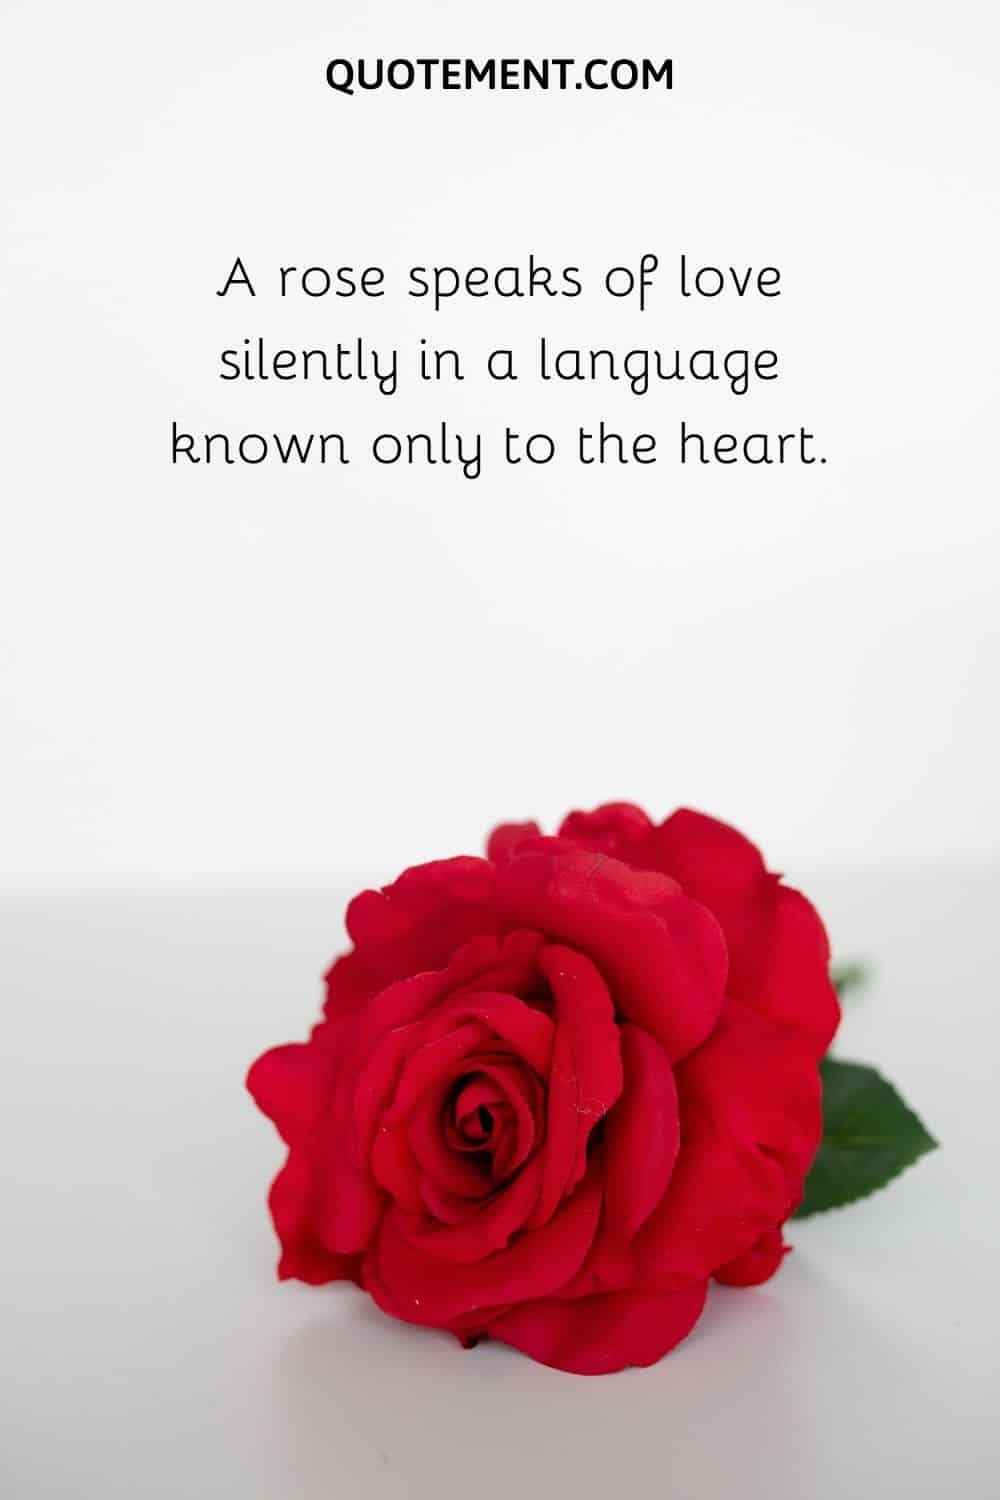 A rose speaks of love silently in a language known only to the heart.